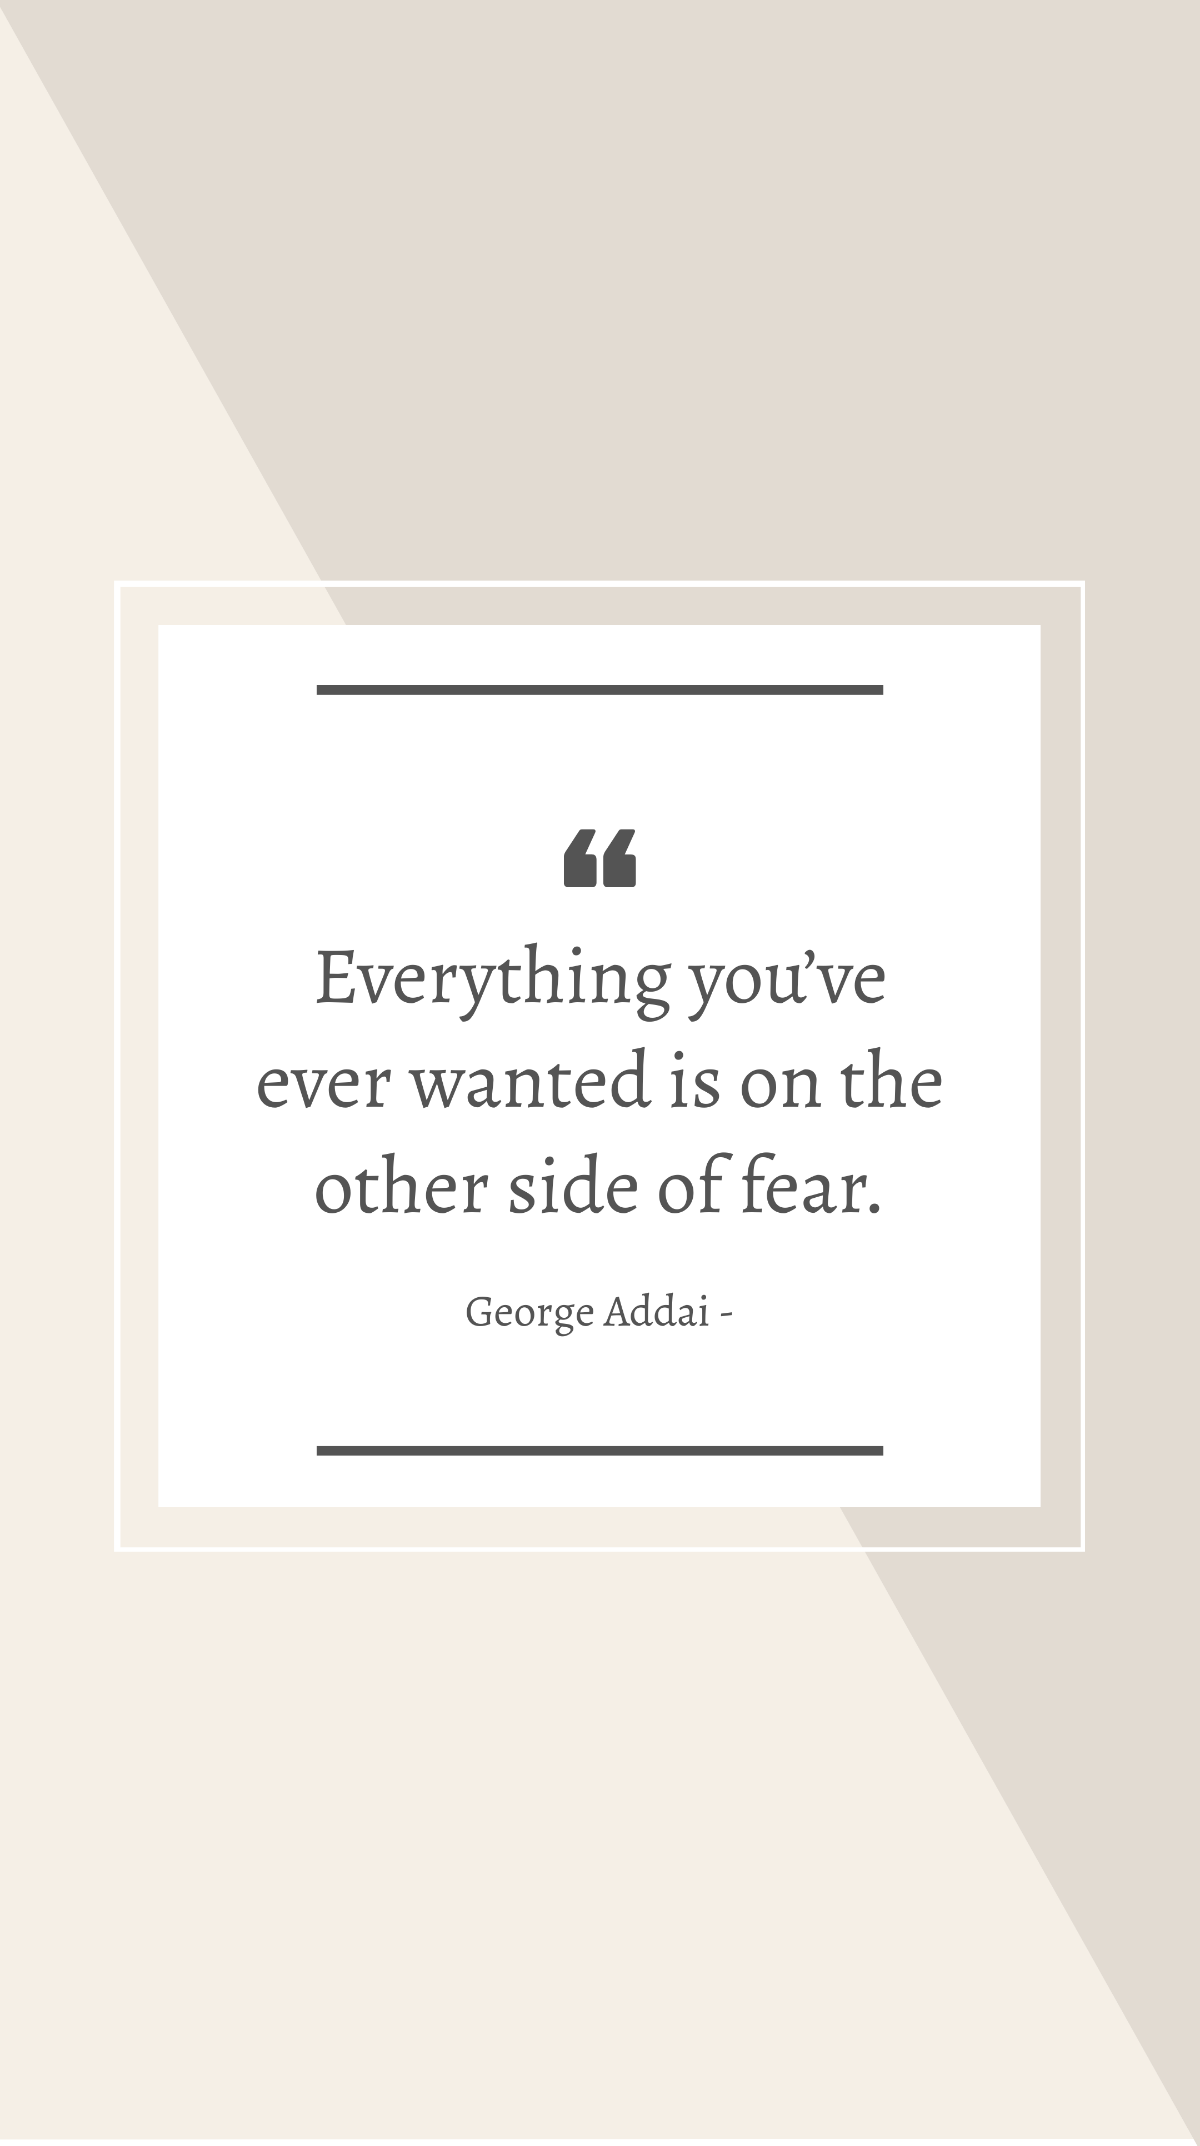 George Addai - Everything you’ve ever wanted is on the other side of fear. Template